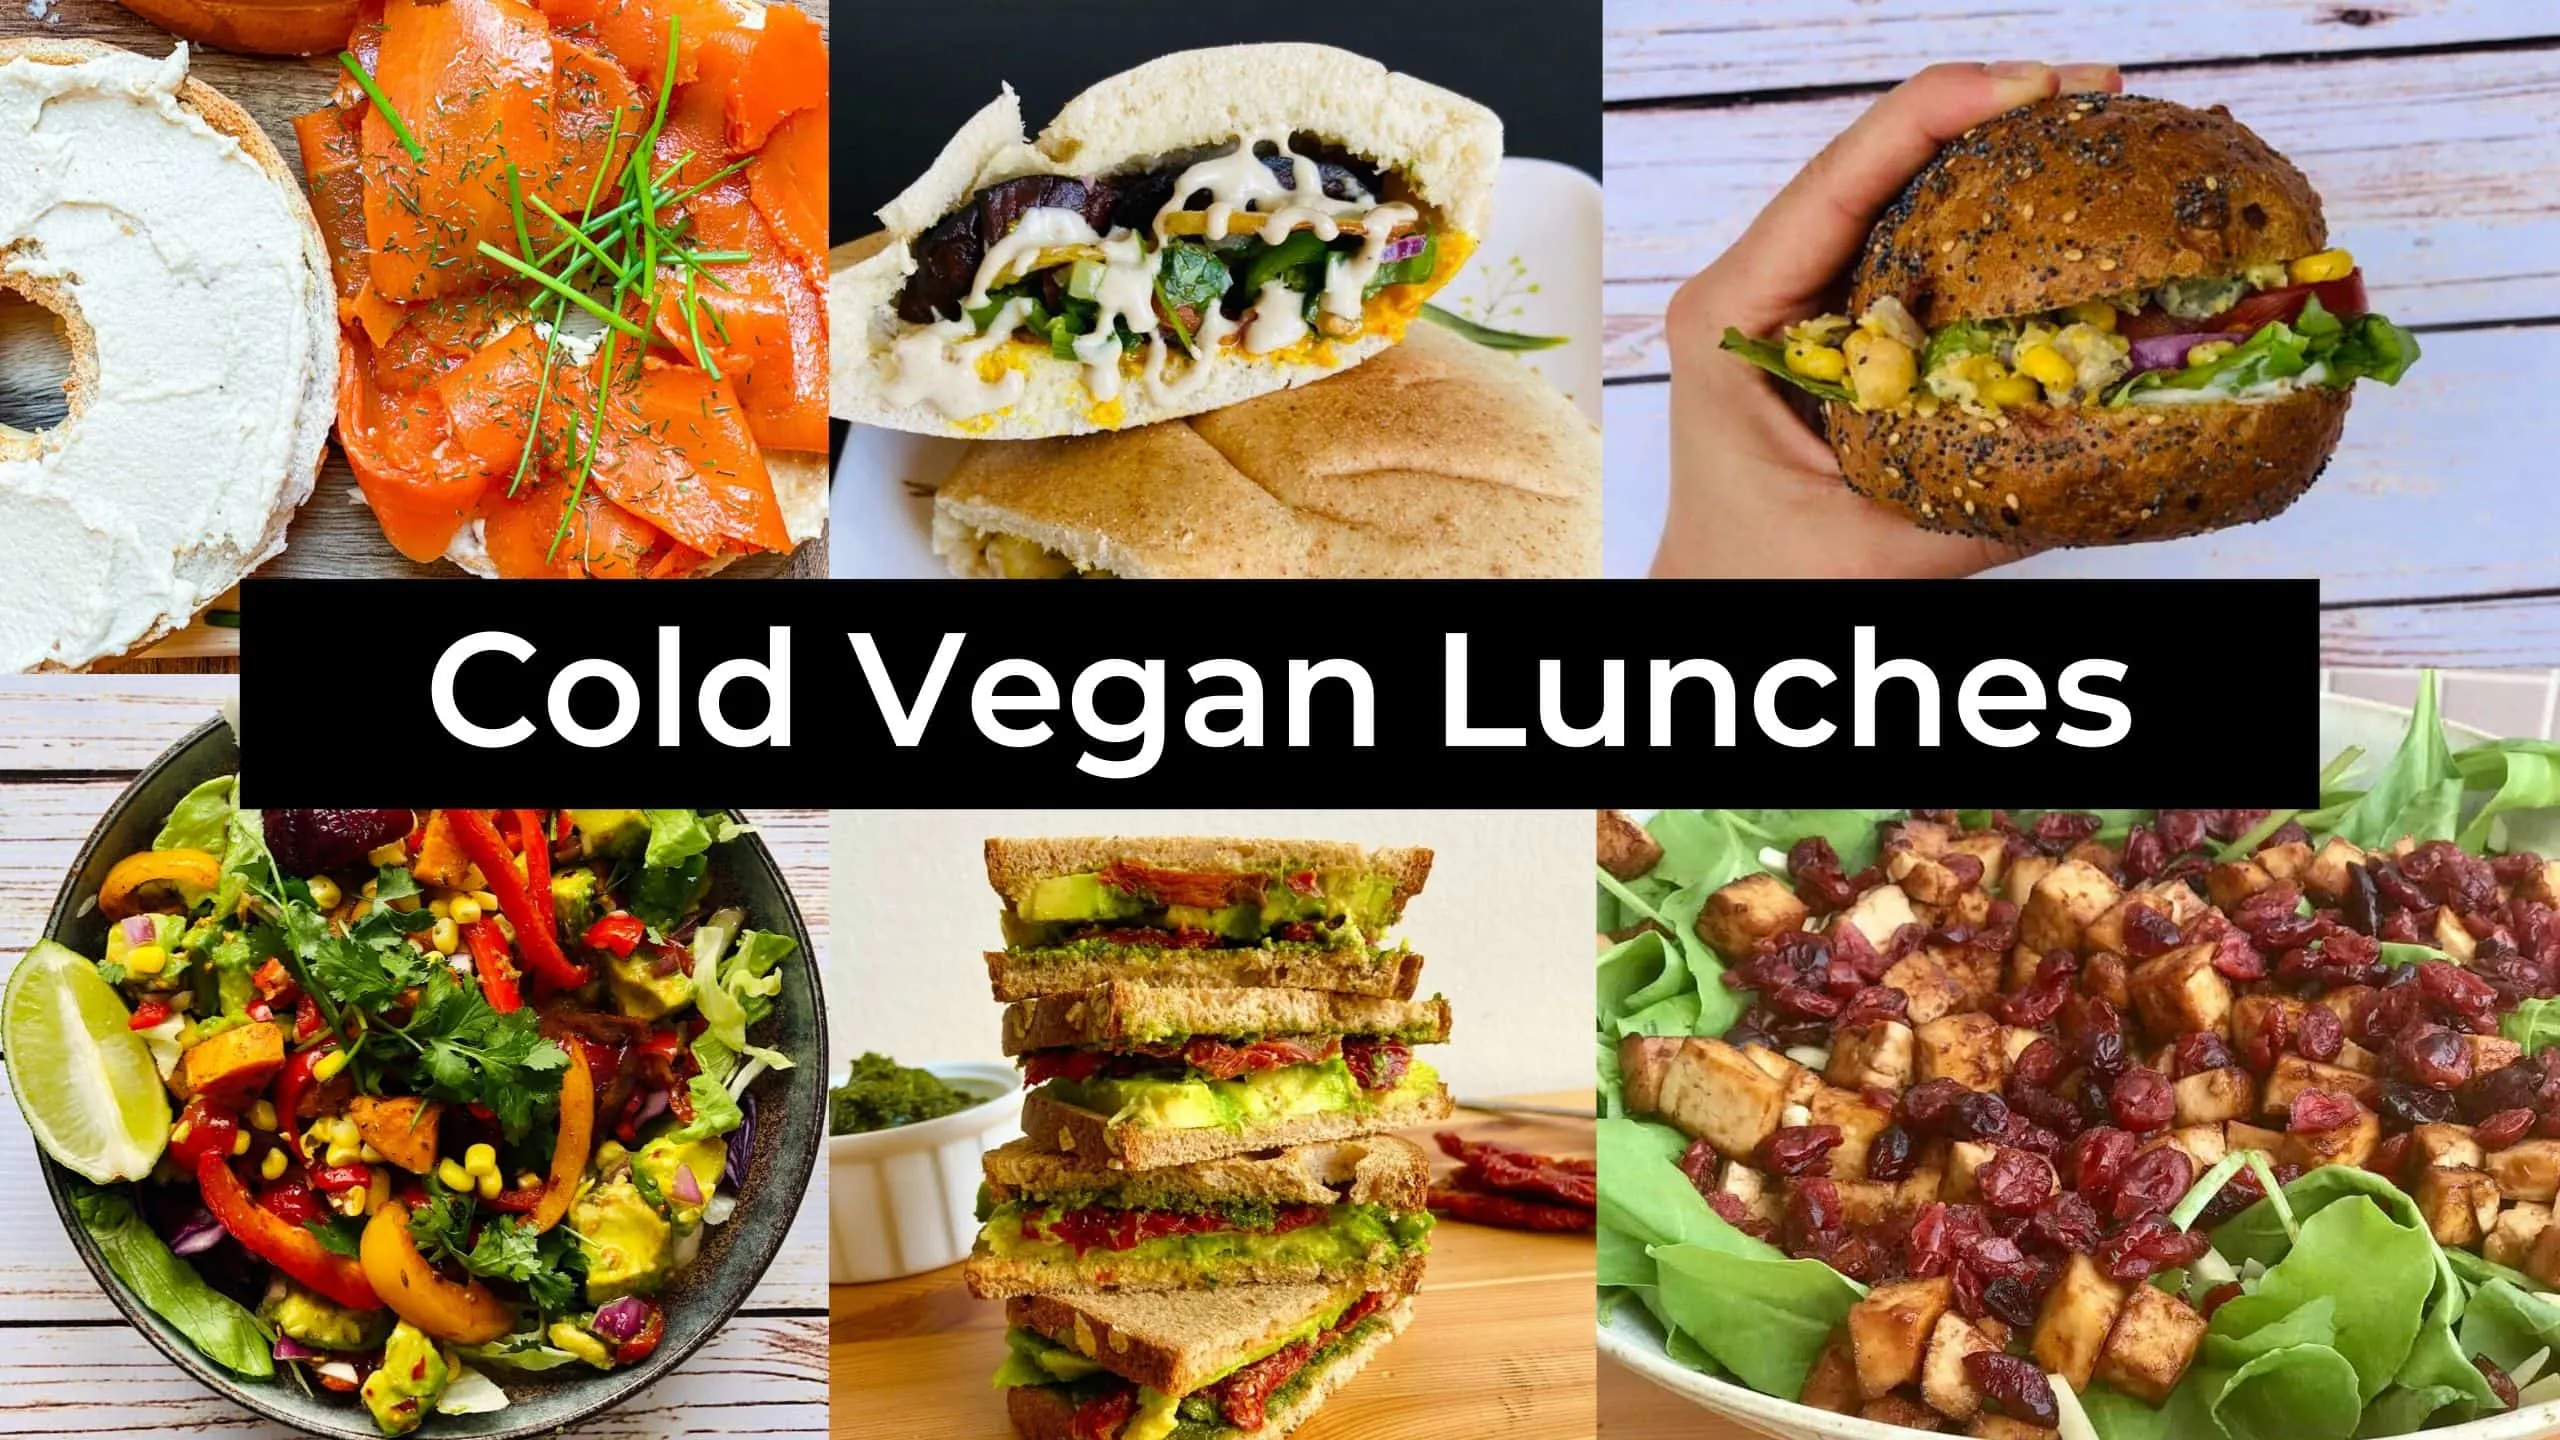 Cold Vegan Lunches